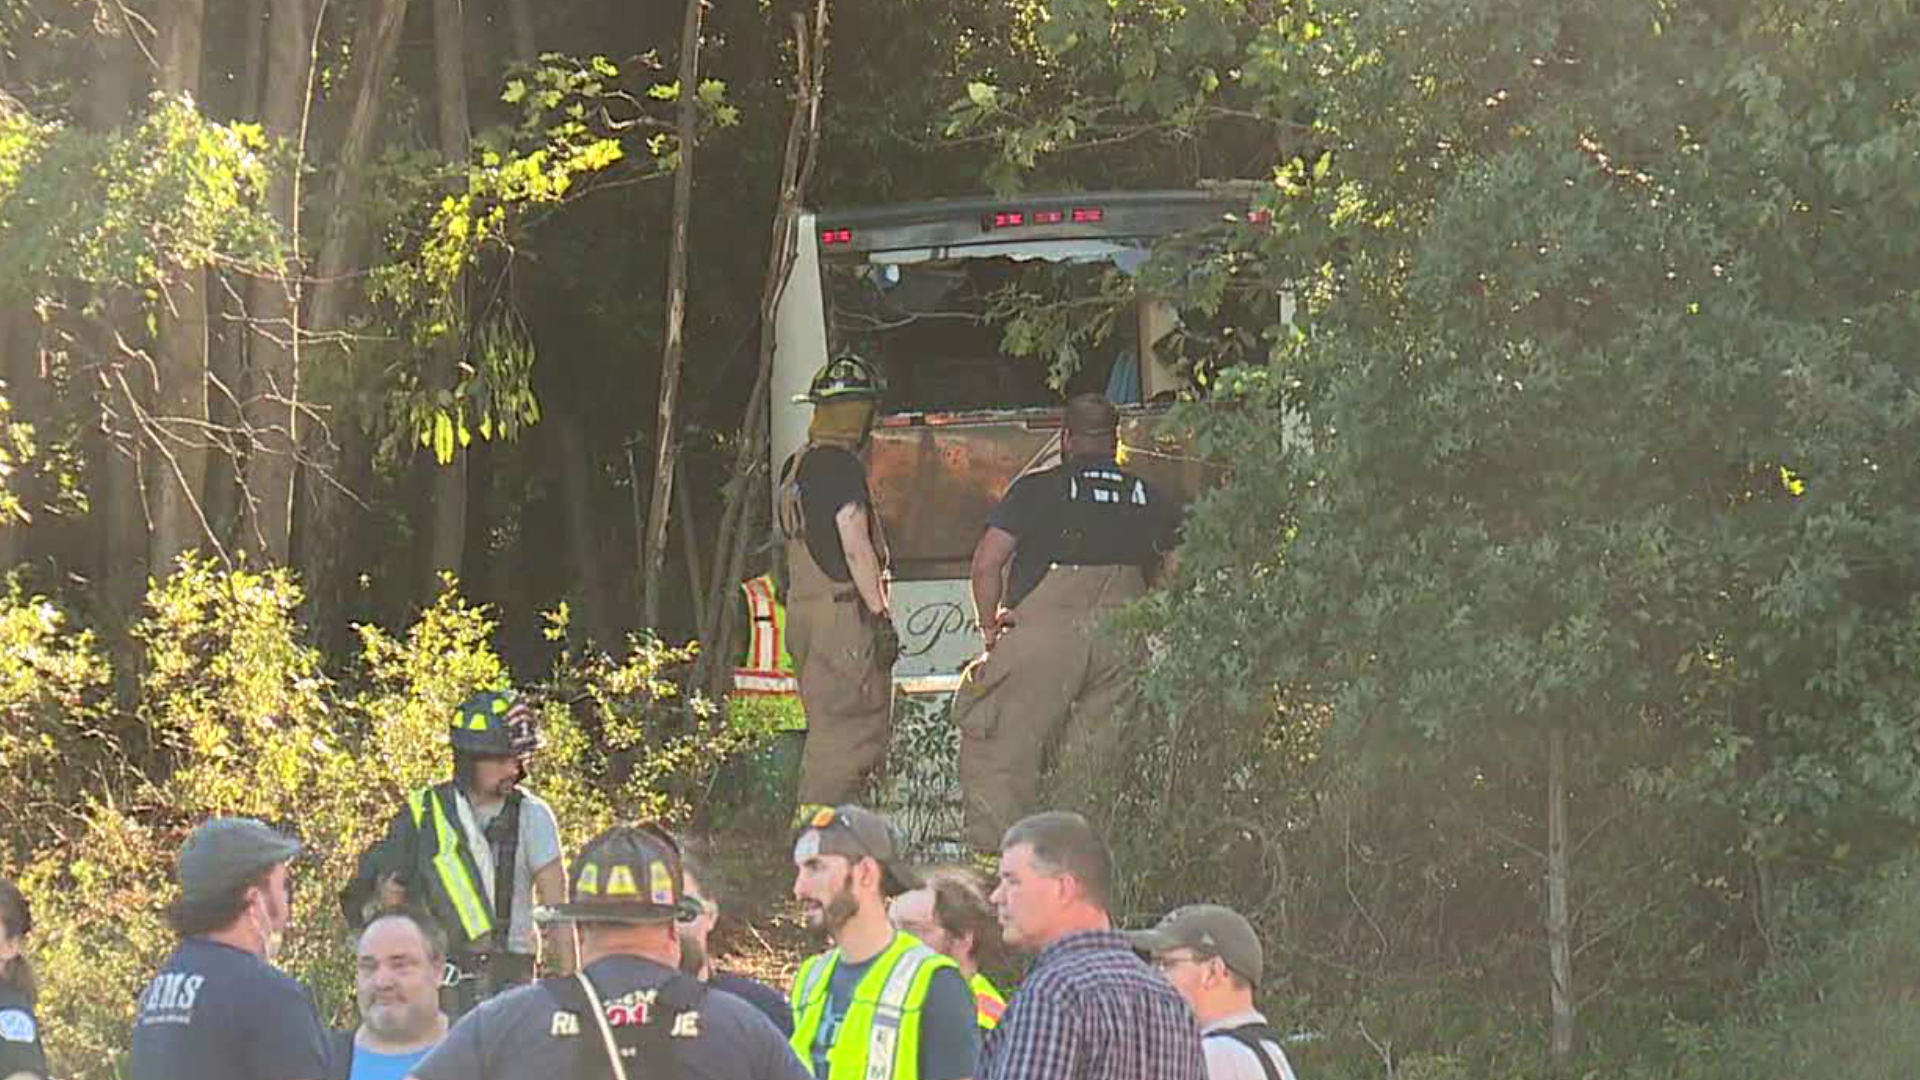 State police are providing an update on the bus crash that injured 32 people Sunday afternoon on Interstate 81 in Schuylkill County.